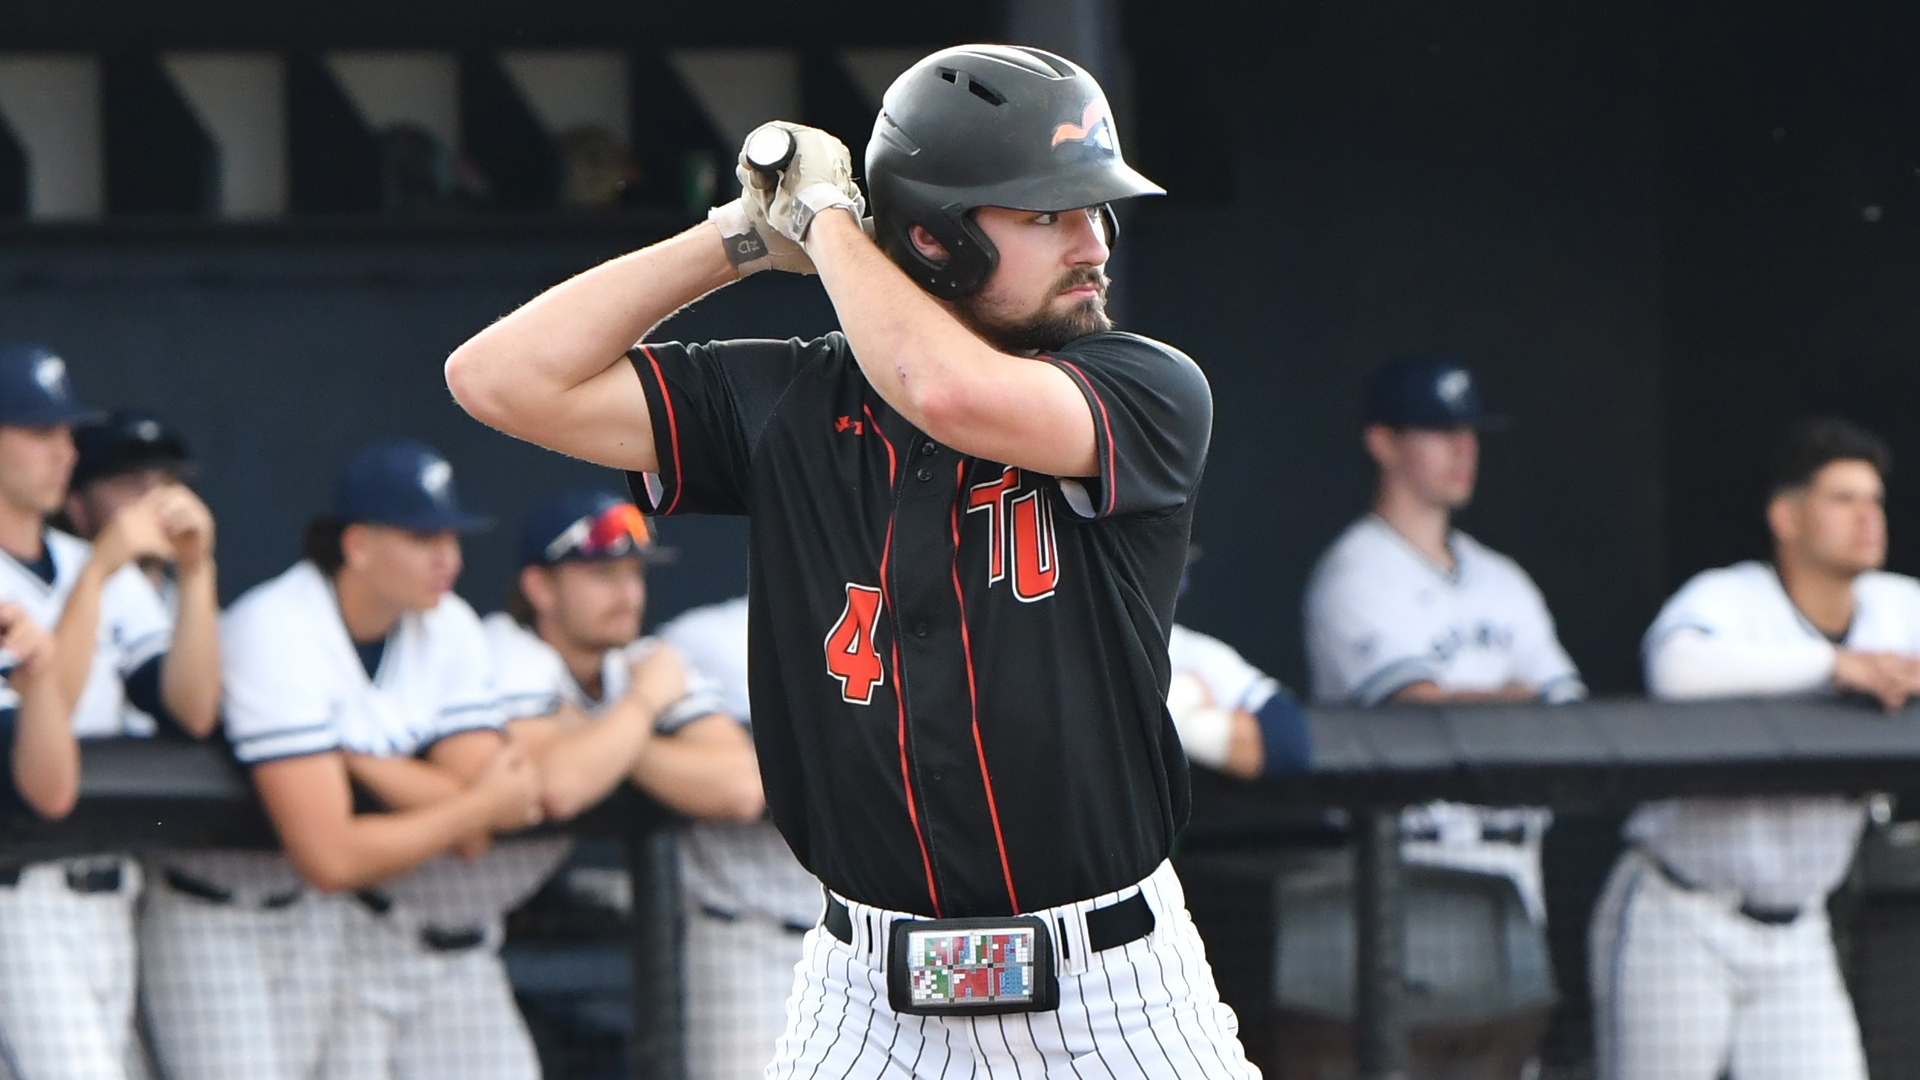 Flood has four-hit game in 10-7 win at Emory &amp; Henry